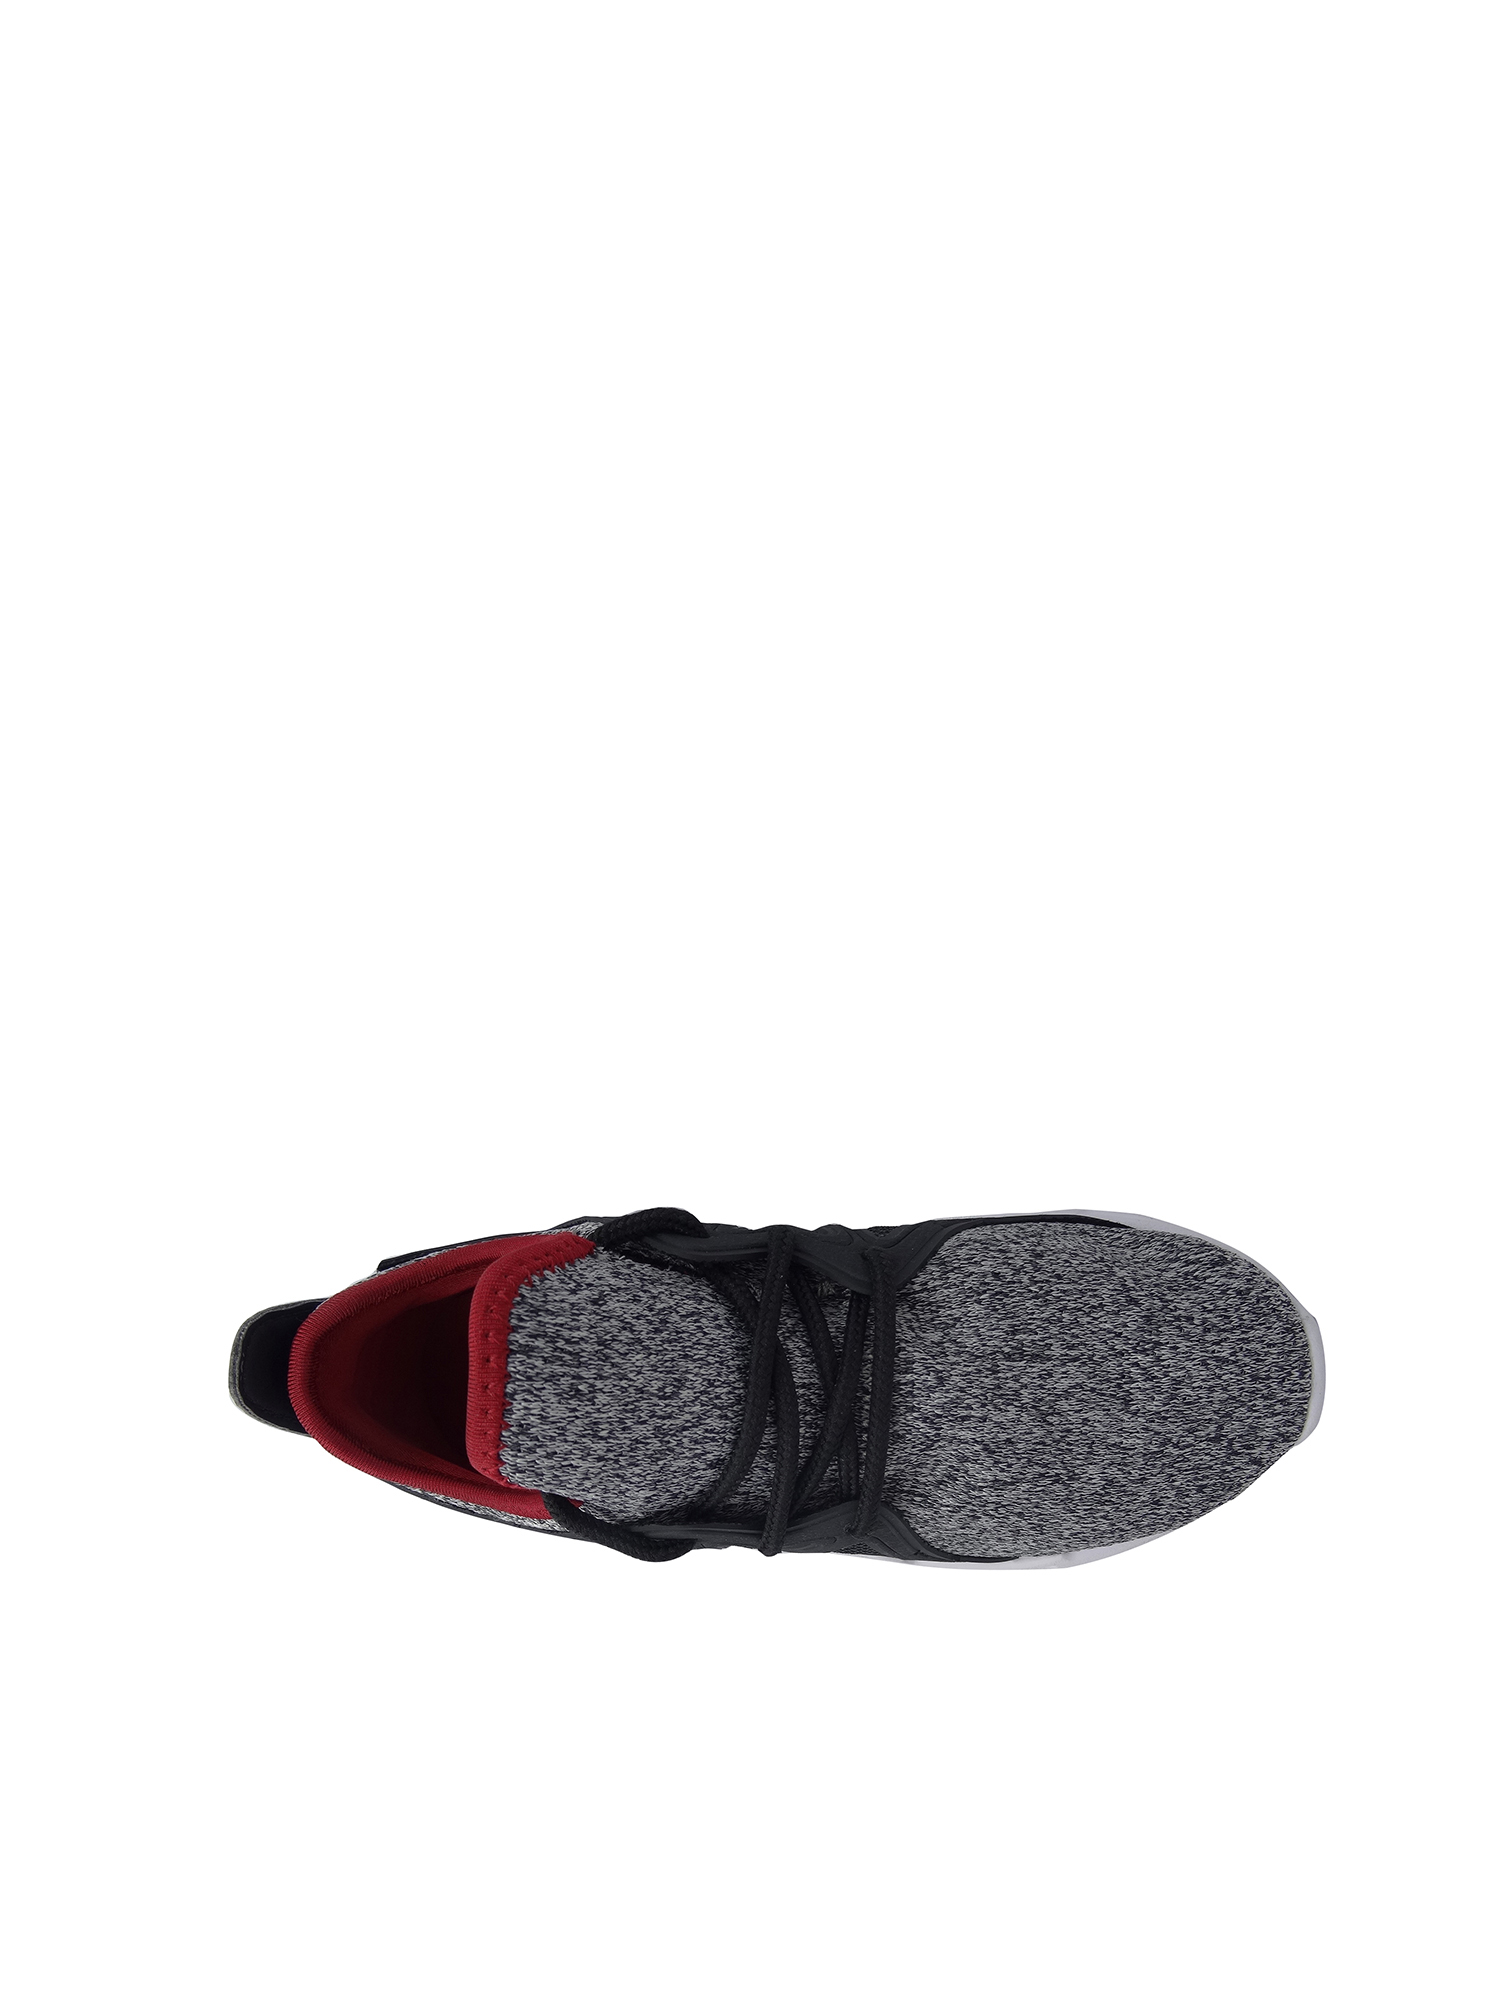 Boy's Lightweight Knit Athletic Shoe - image 4 of 5